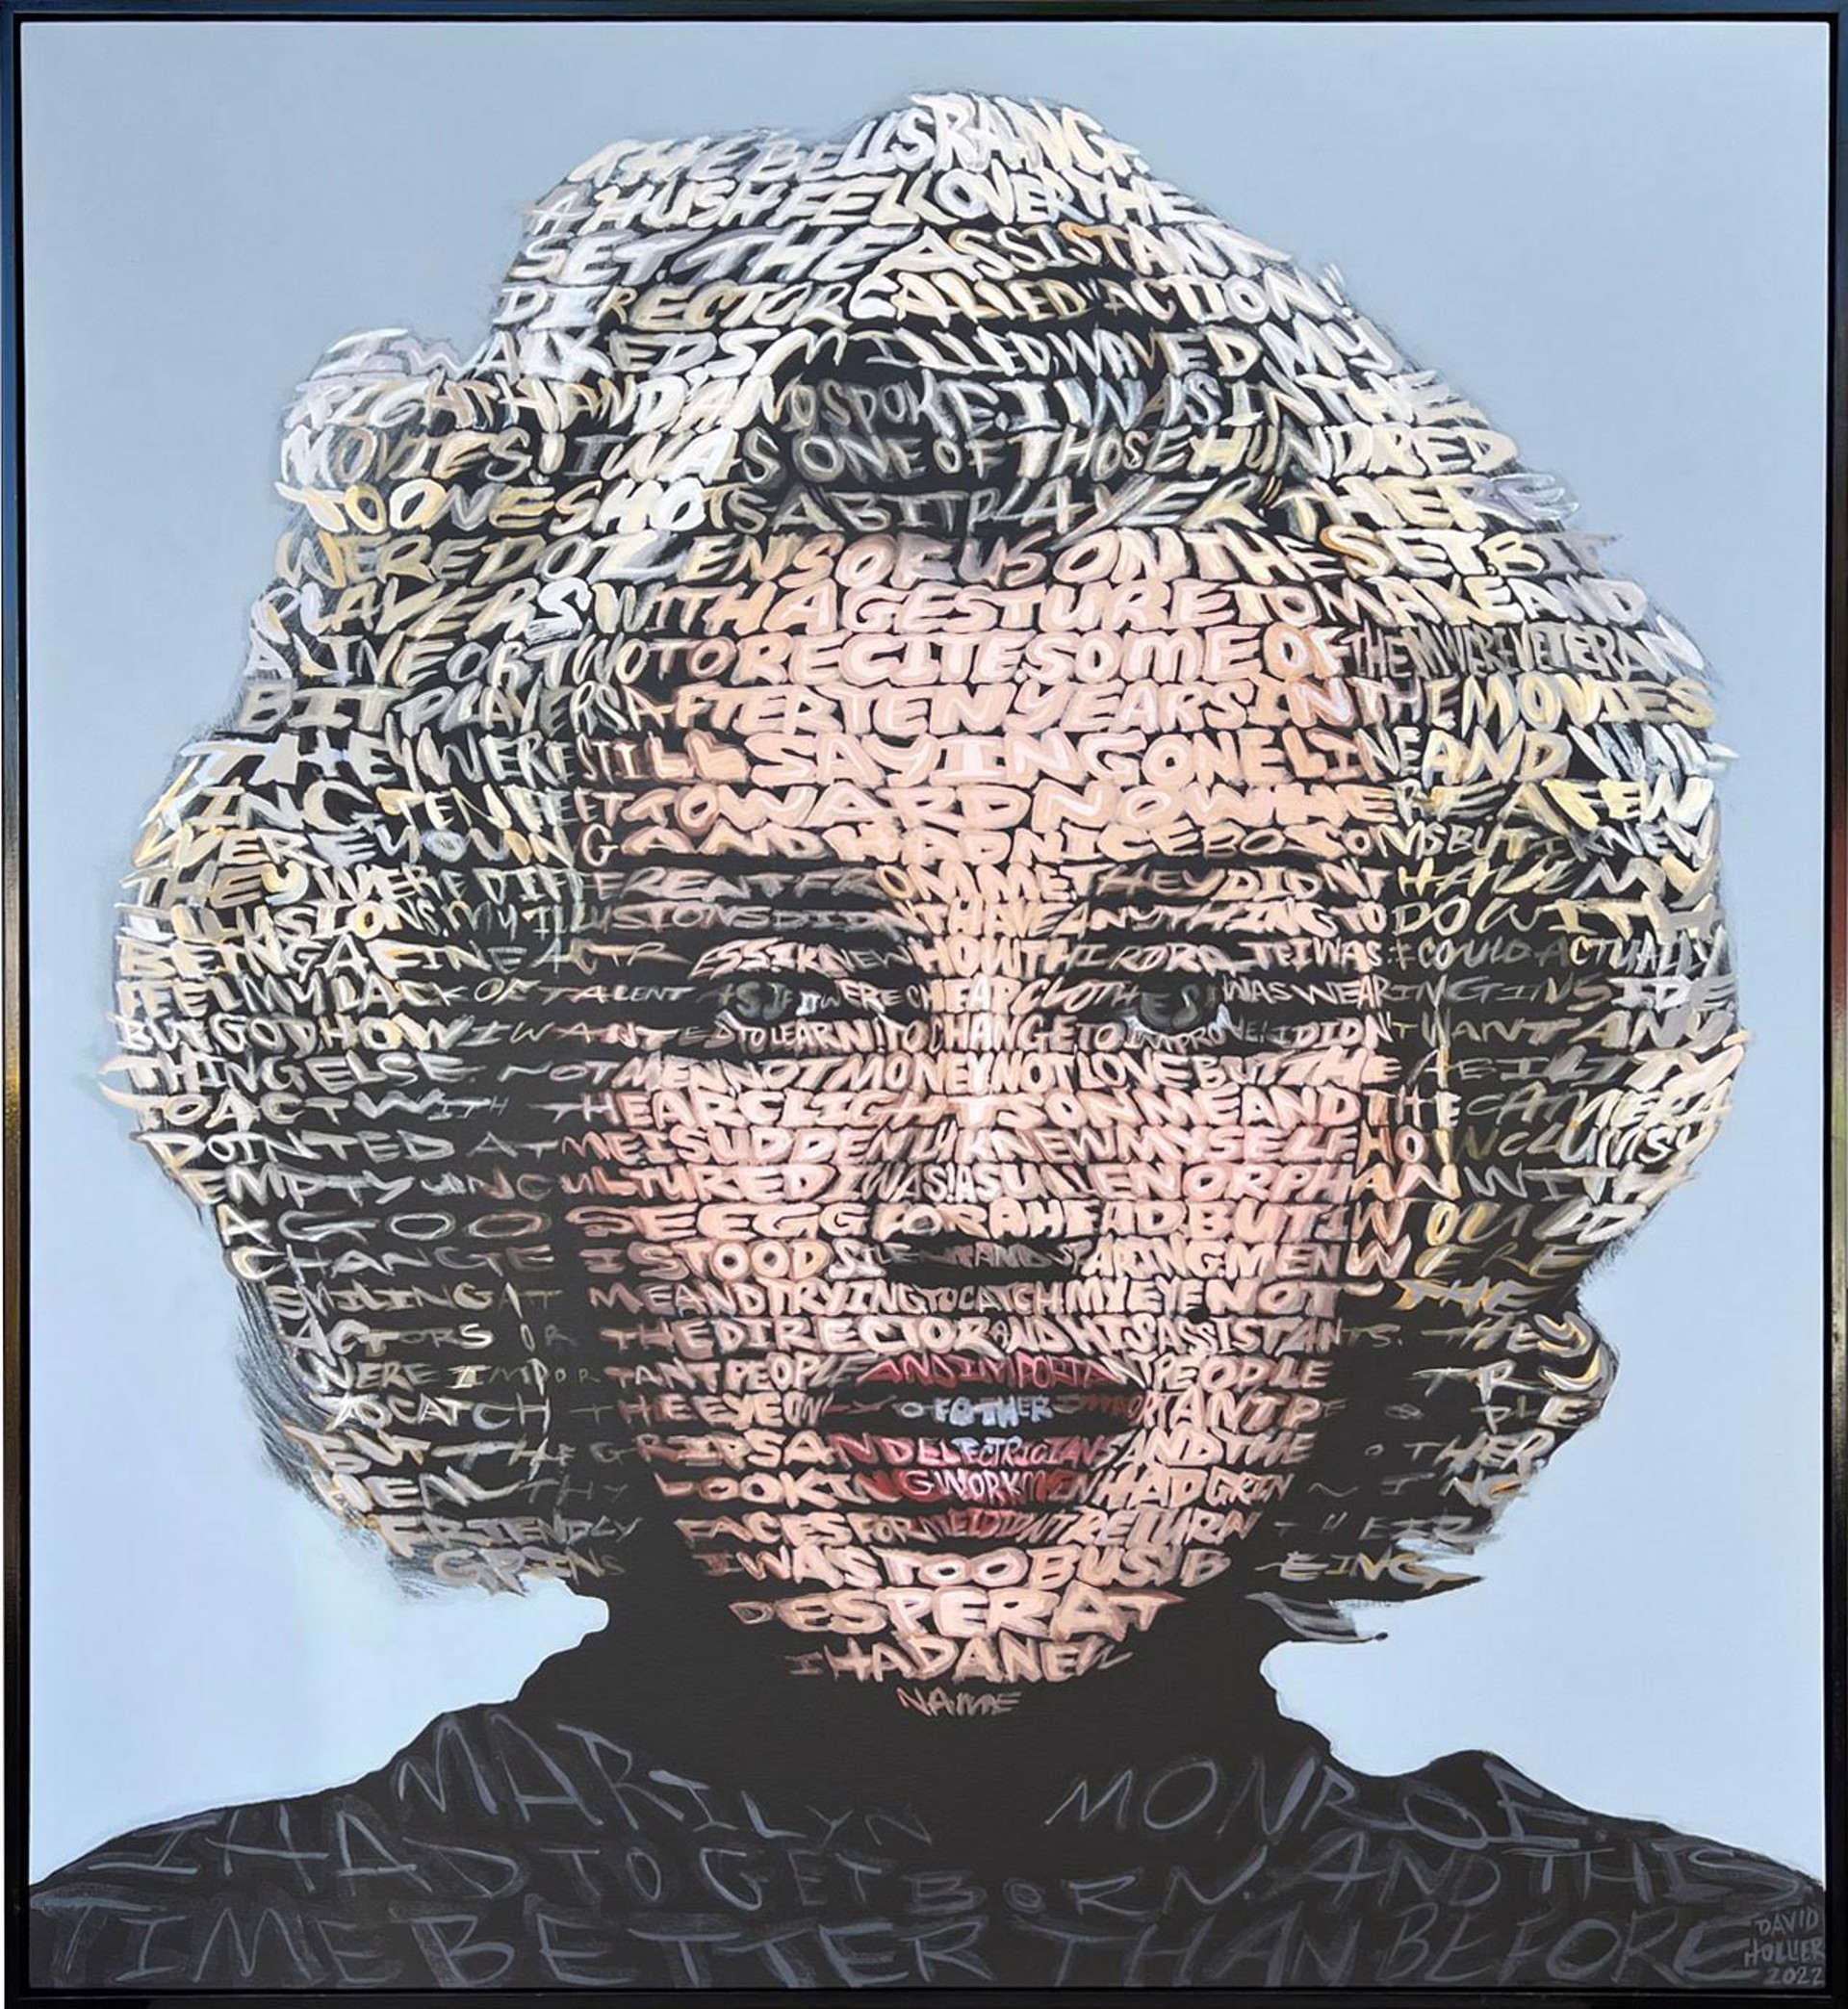 Blue Marilyn (Text: from "My Story" by Marilyn Monroe) by David Hollier